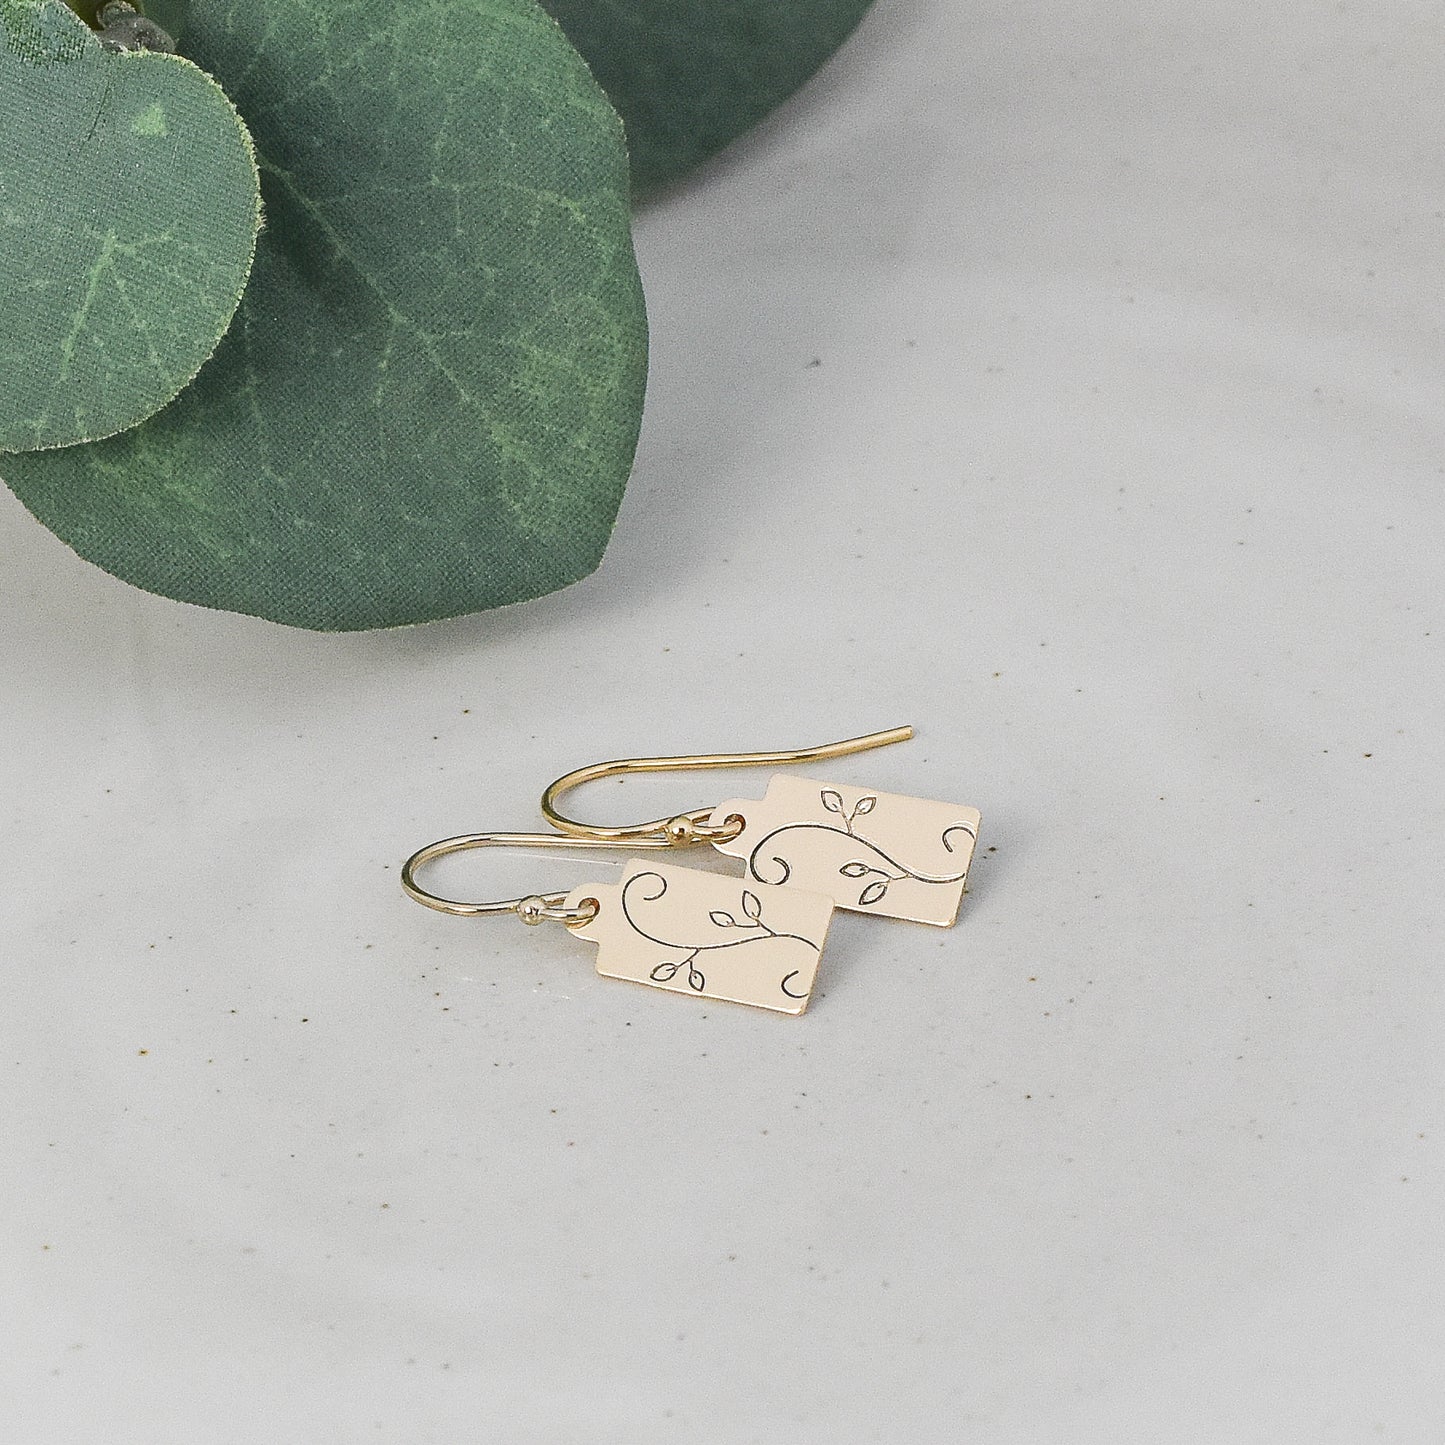 Swirly Vine Tag Earrings - Gold or Silver